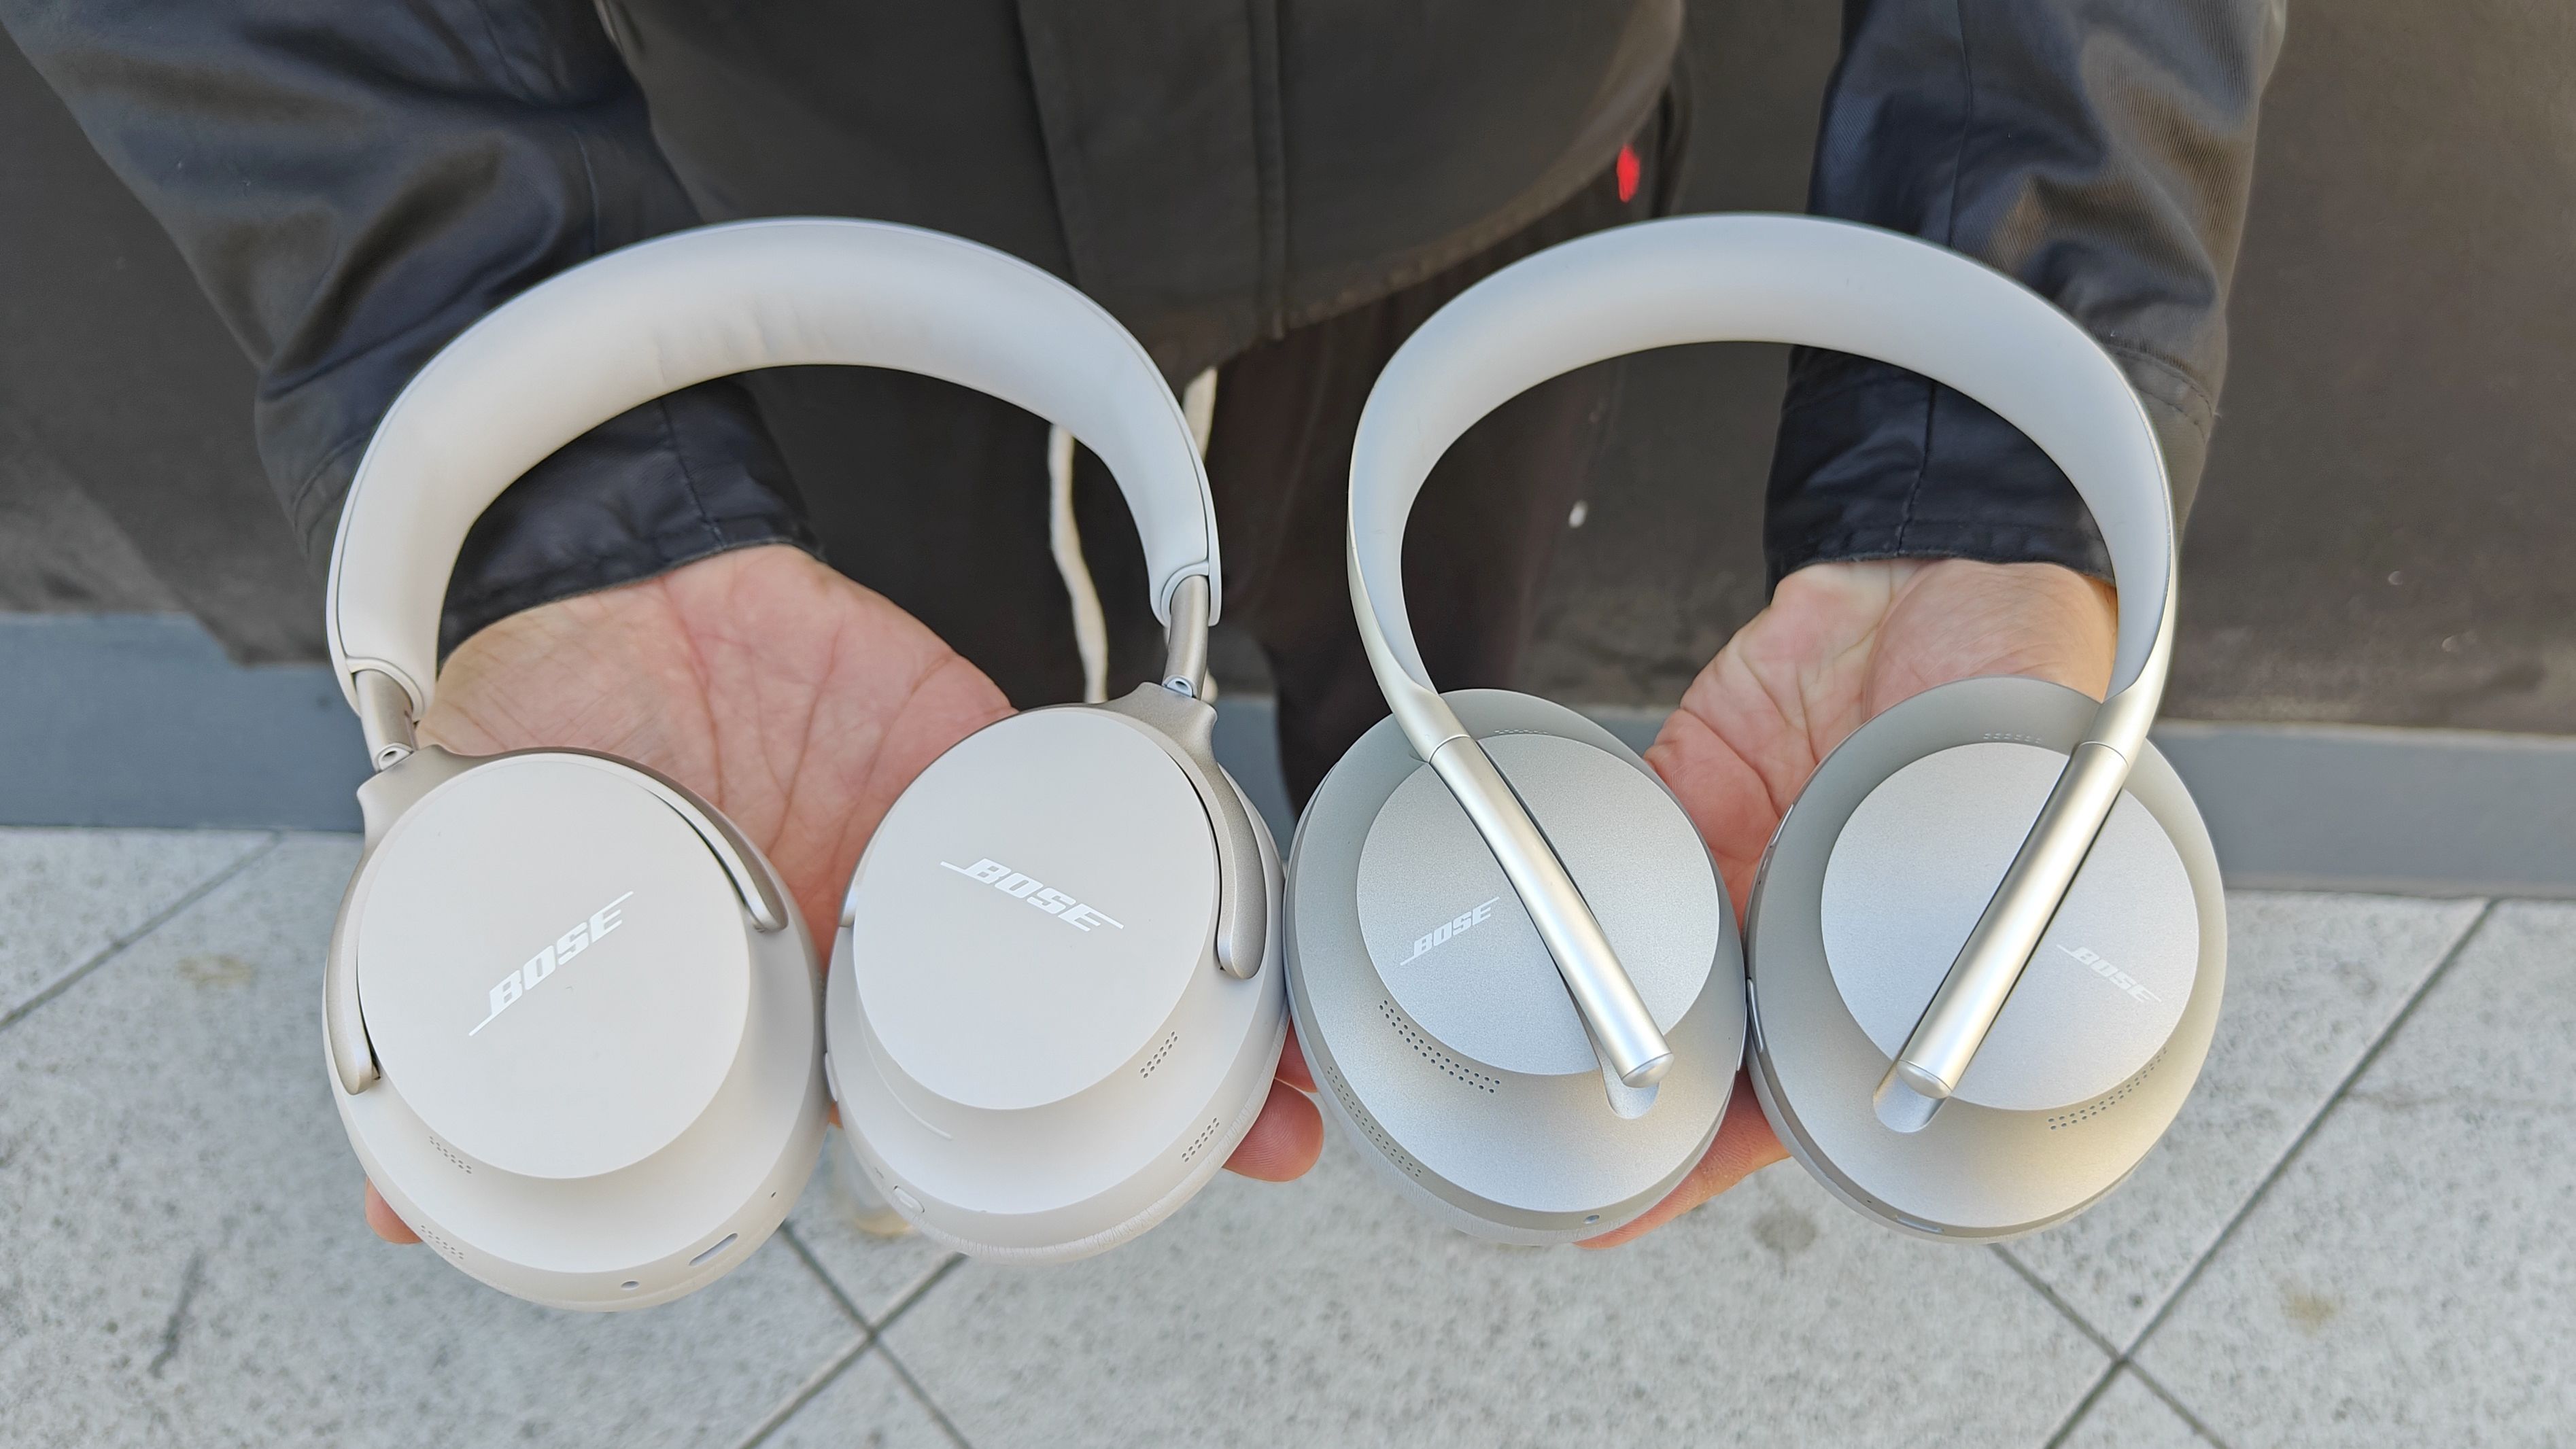 Hands-on with the new Bose Noise Cancelling Headphones 700 - CNET